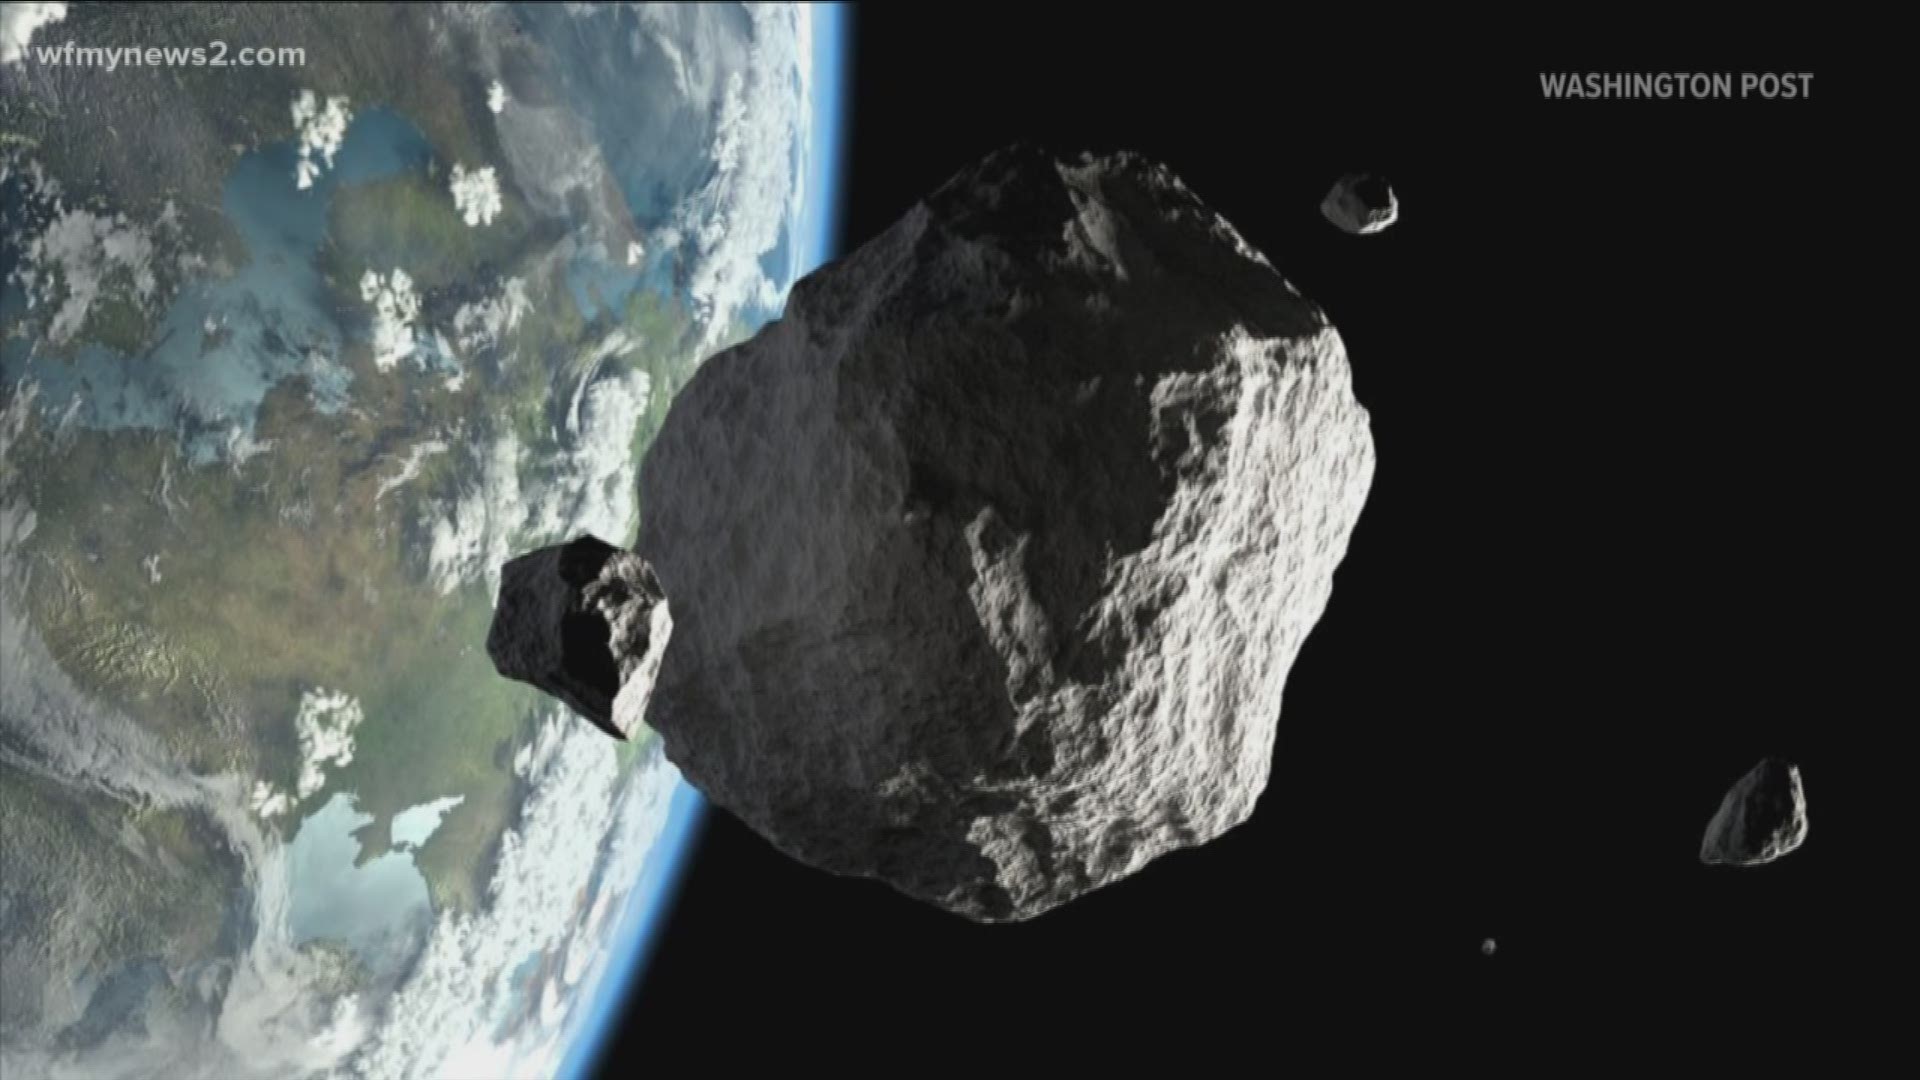 You ask; we VERIFY. A post about a ‘killer’ asteroid getting close to earth is true…but a phenomenon like this is common, and “close” is a relative term.